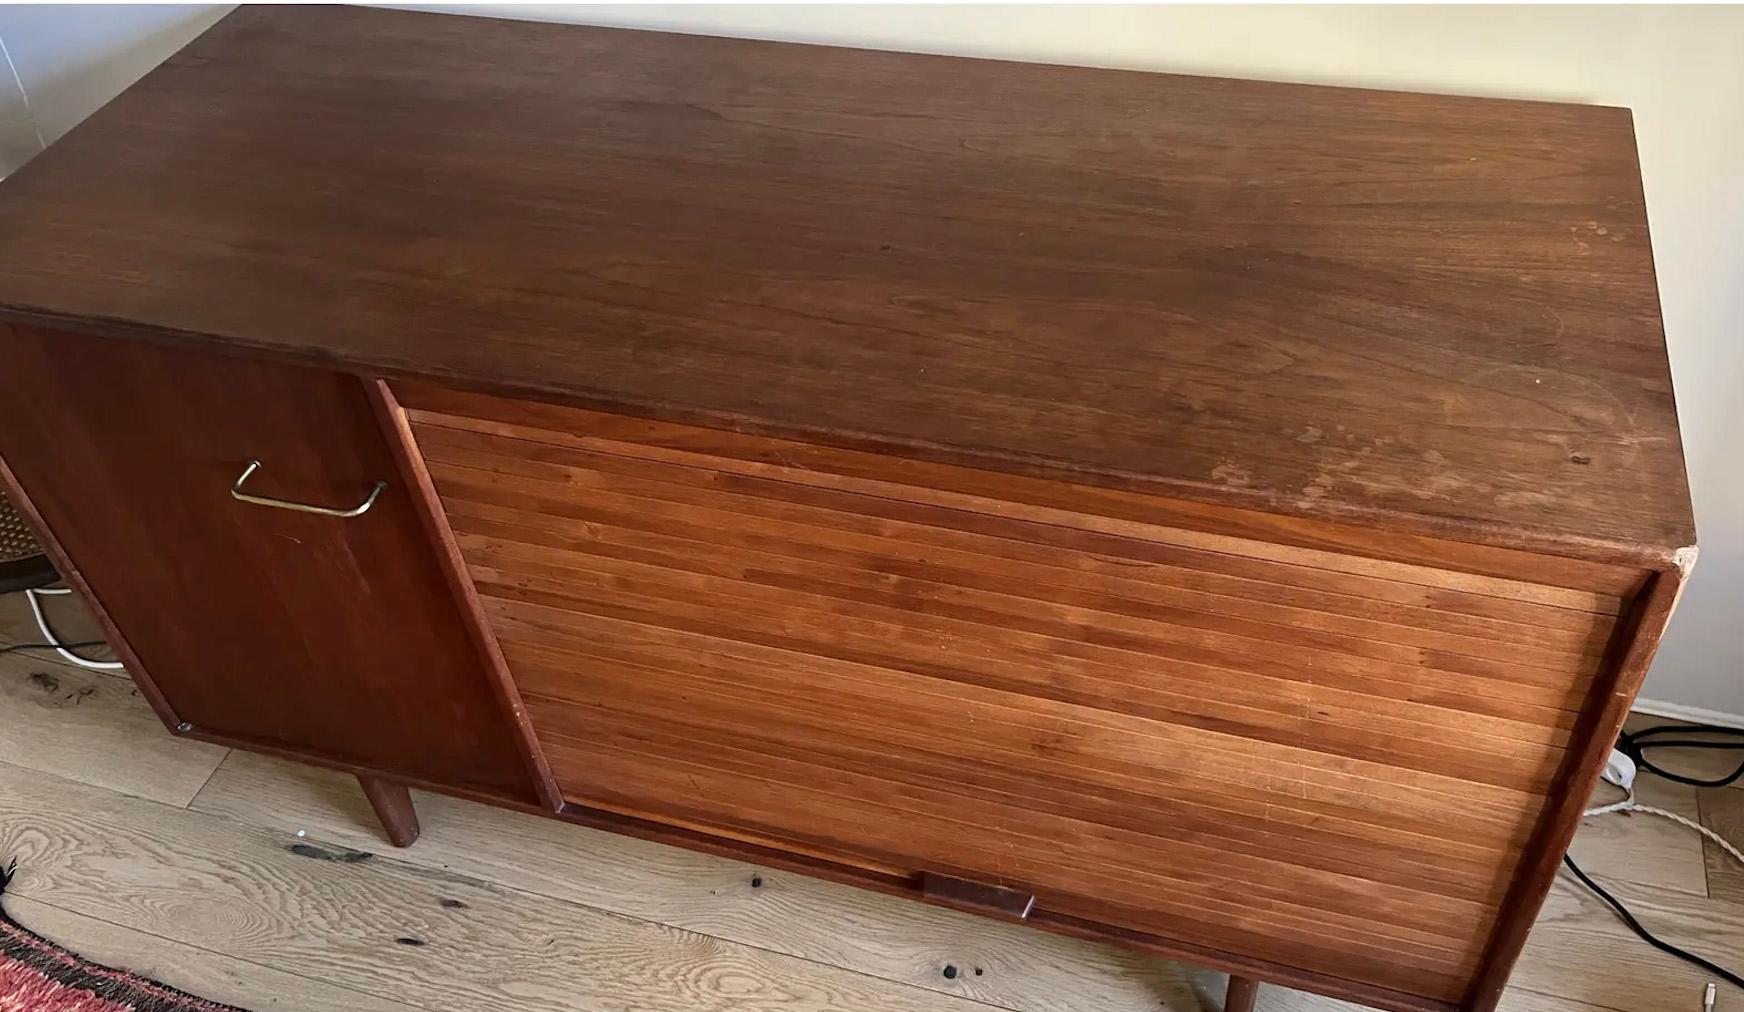 Stained 1960s Jens Risom Teak Credenza